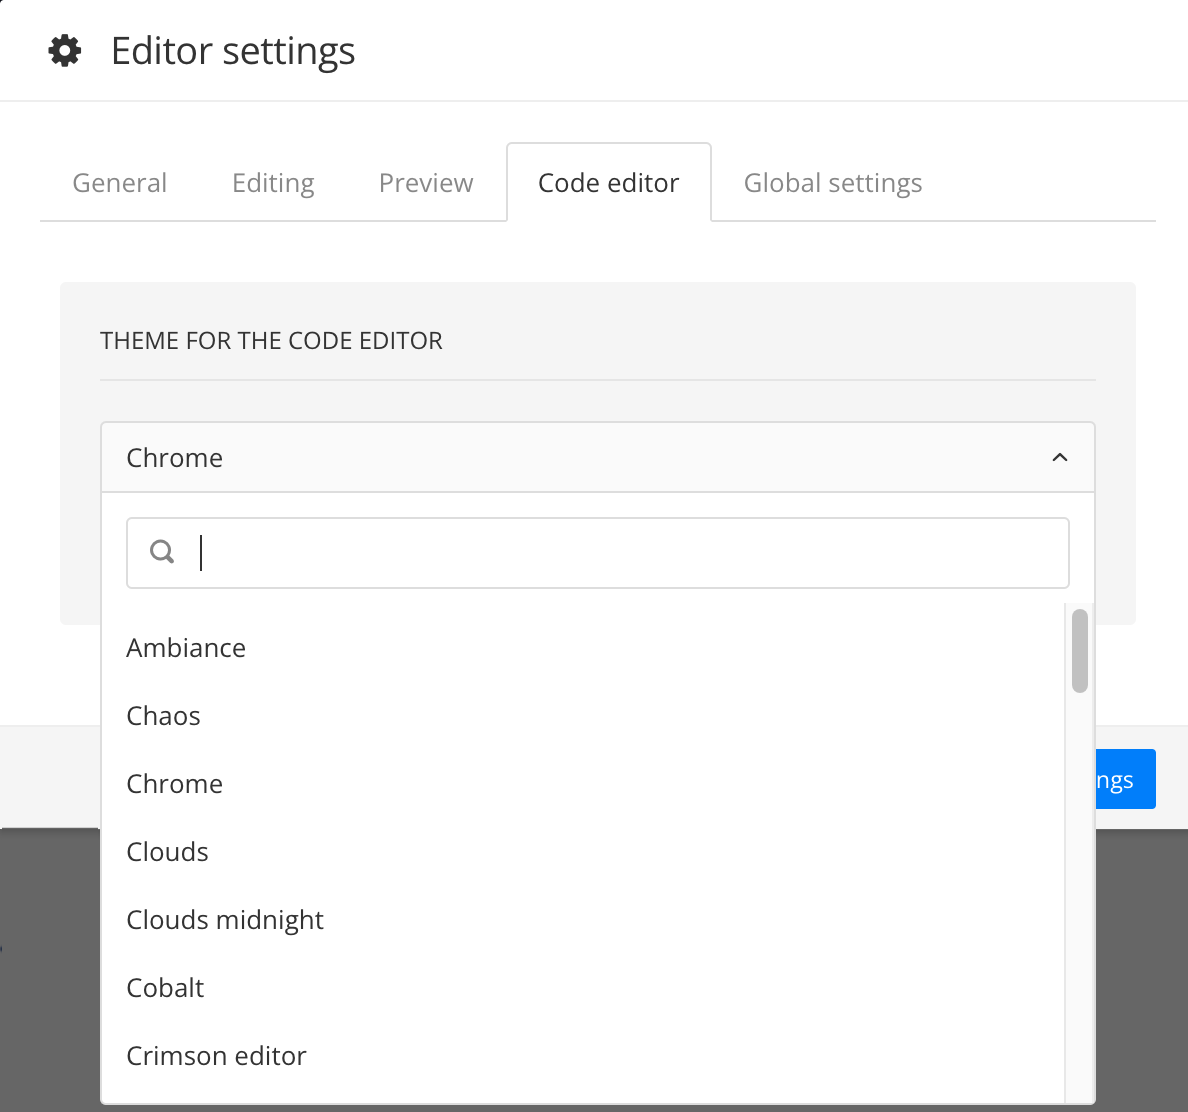 Code editor tab. In the theme for the code editor section, the dropdown menu has been selected to reveal a list of themes to choose from.